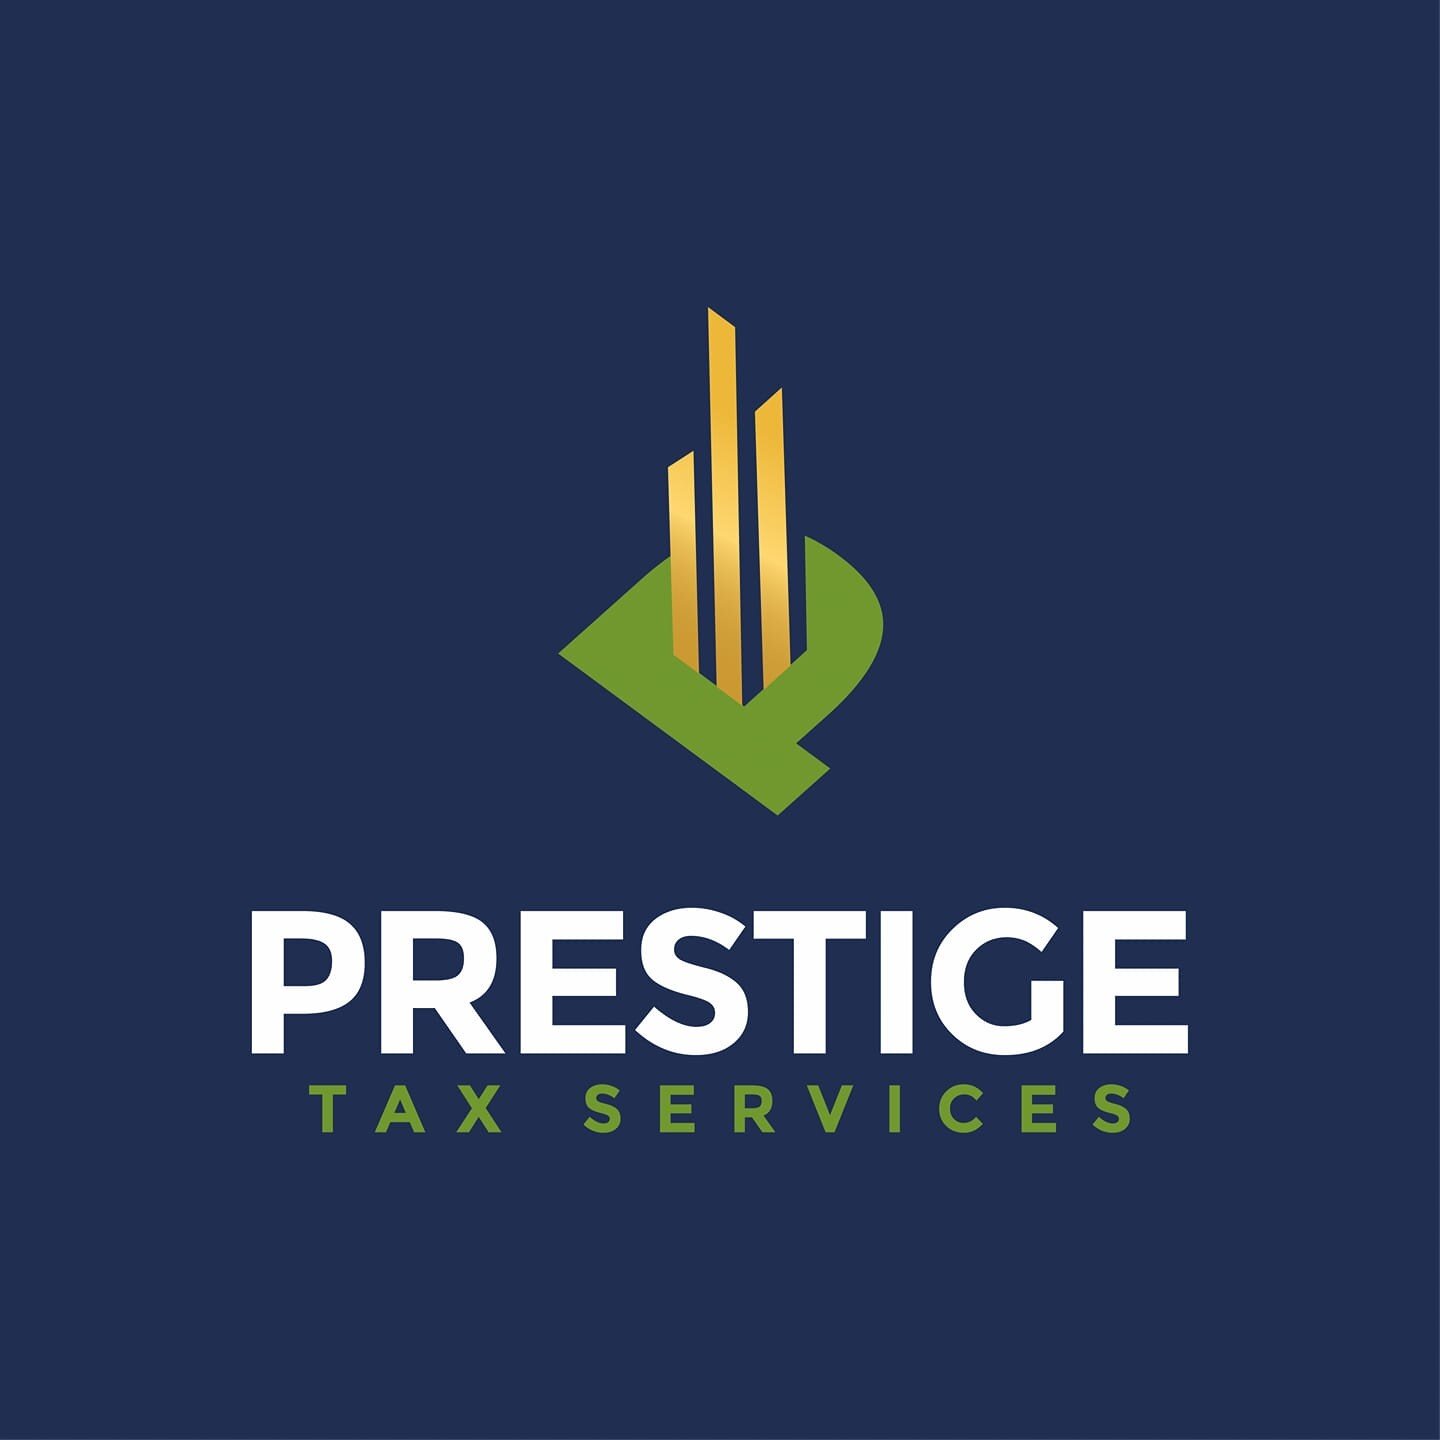 The 4th OneTouch Media Business of the Week is Prestige Tax Services!

Dominique Hill is the owner of Prestige, which offers tax preparation, small business consulting, business credit workshop, and notary services. At Prestige Tax Services, LLC we s